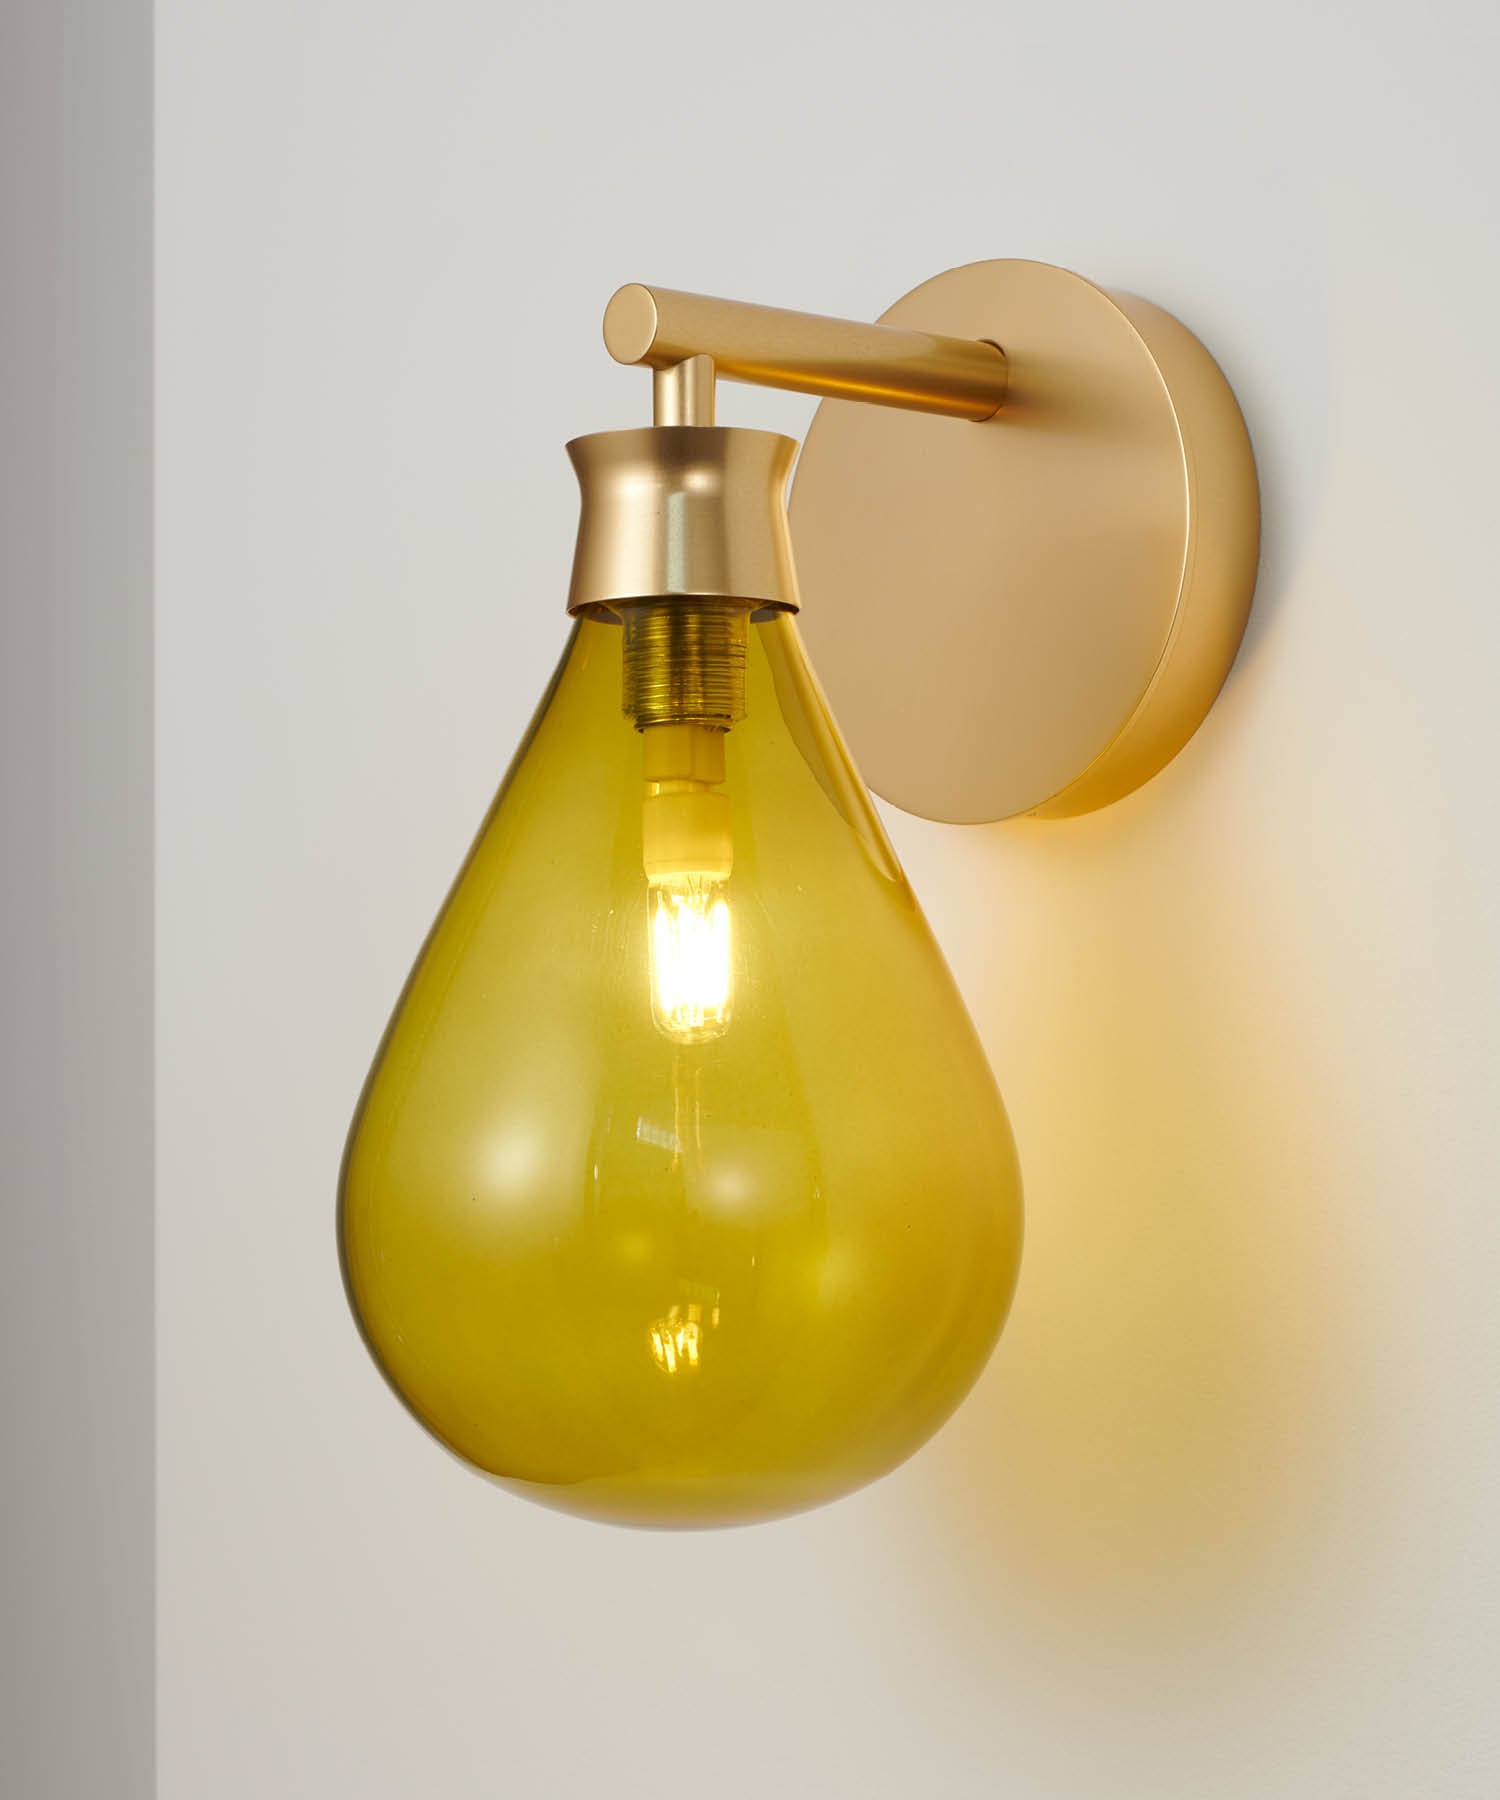 British Cintola Wall Light in Satin Gold with Olive Handblown Glass Globe